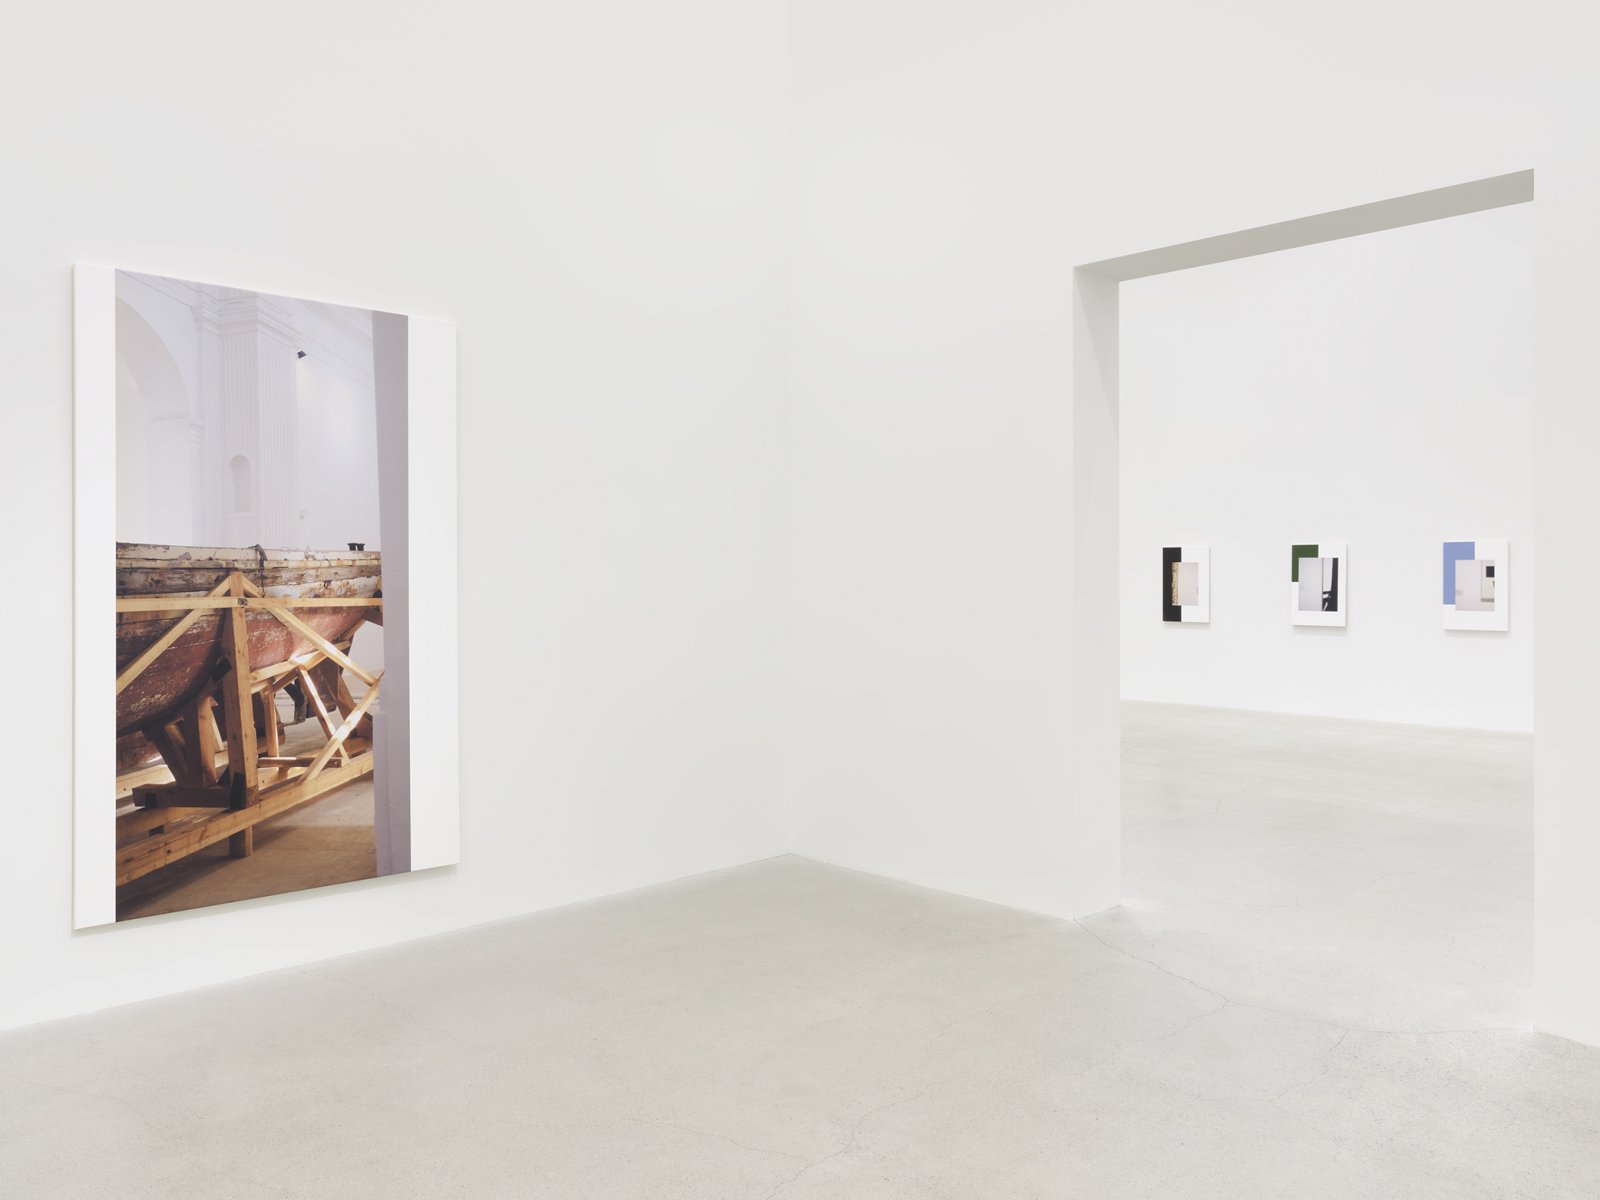 Ian Wallace, installation view, ​In the Museum​, Catriona Jeffries, Vancouver, 2021​ by Ian Wallace